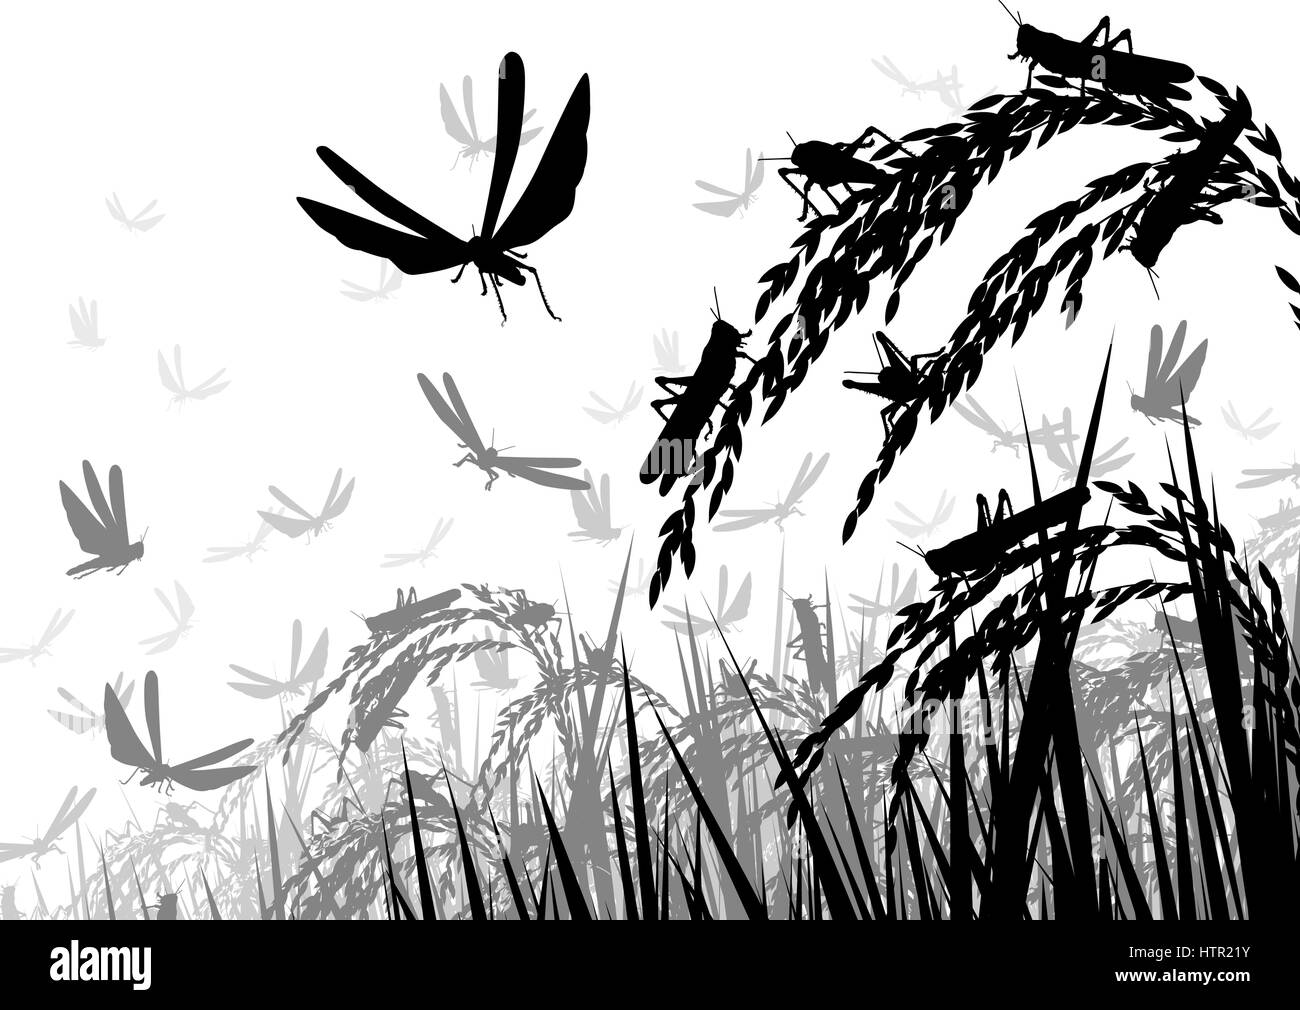 Vector silhouette illustration of a swarm of locusts attacking rice plants and threatening food security Stock Vector